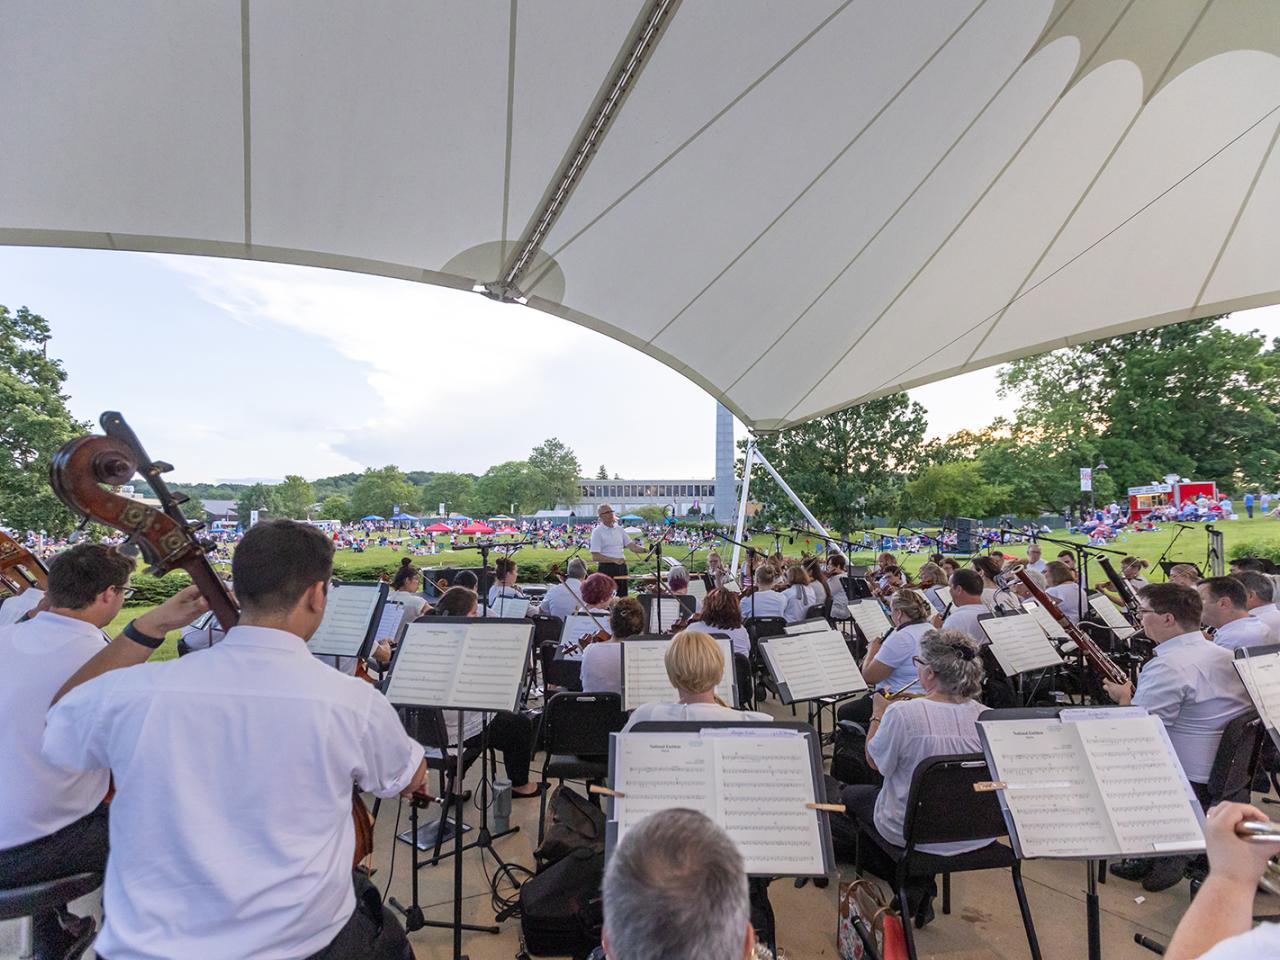 The Newark Granville Symphony Orchestra fills the Martha Grace Reese Amphitheatre playing live music for guests.